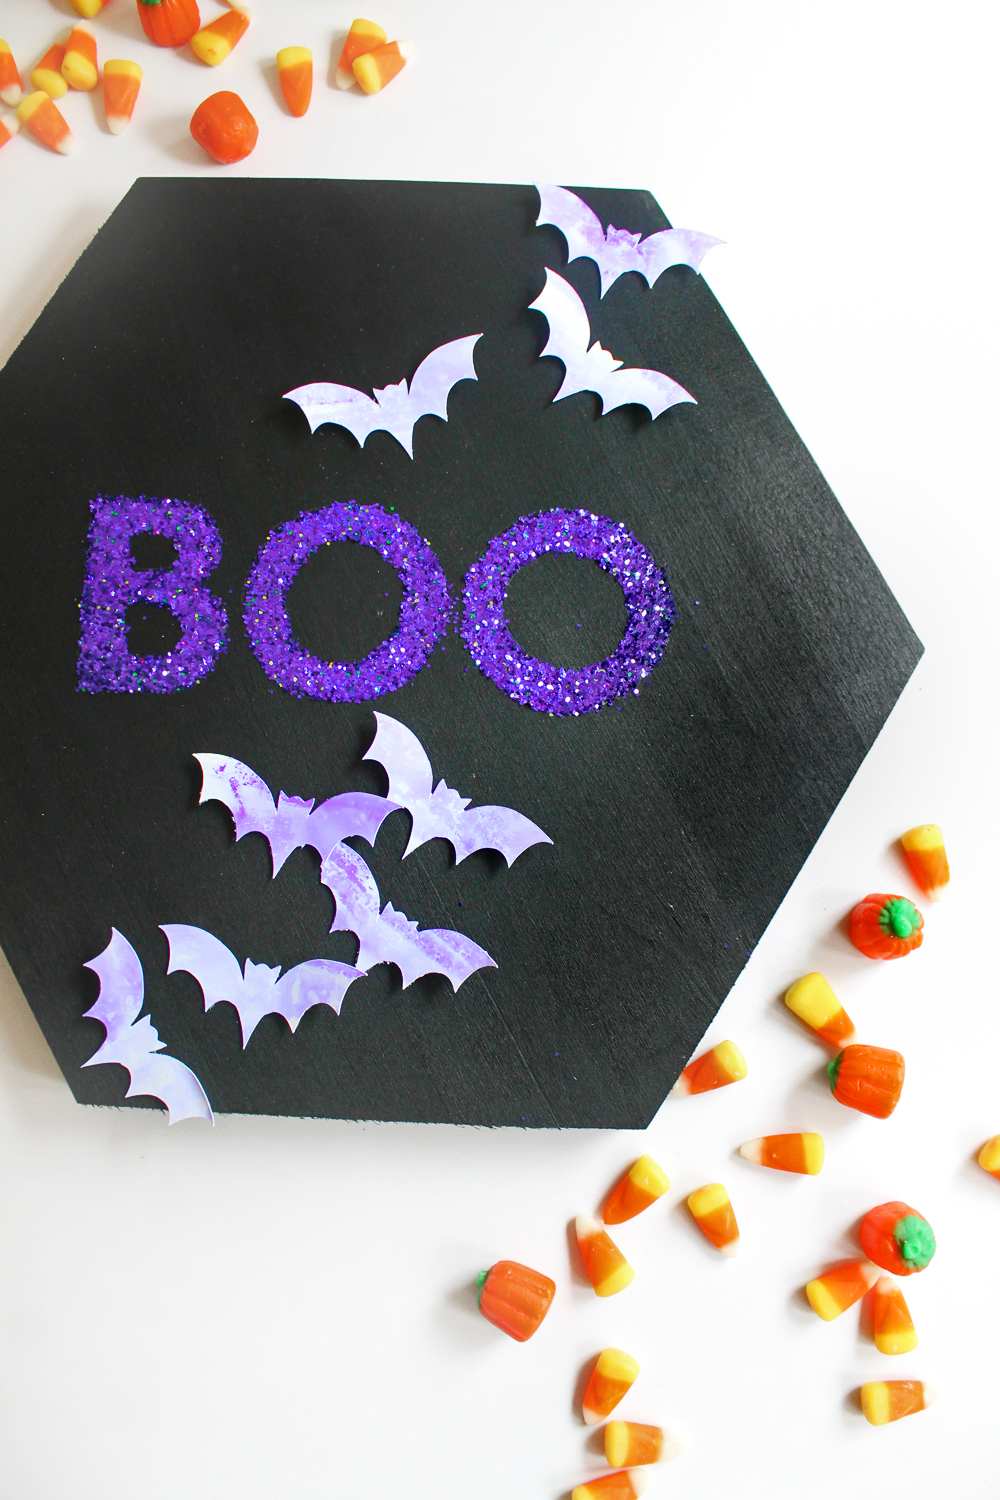 Easy Bat Halloween Plaque You Can Make! Come find this fun diy by @studiokatie & @tombowusa!